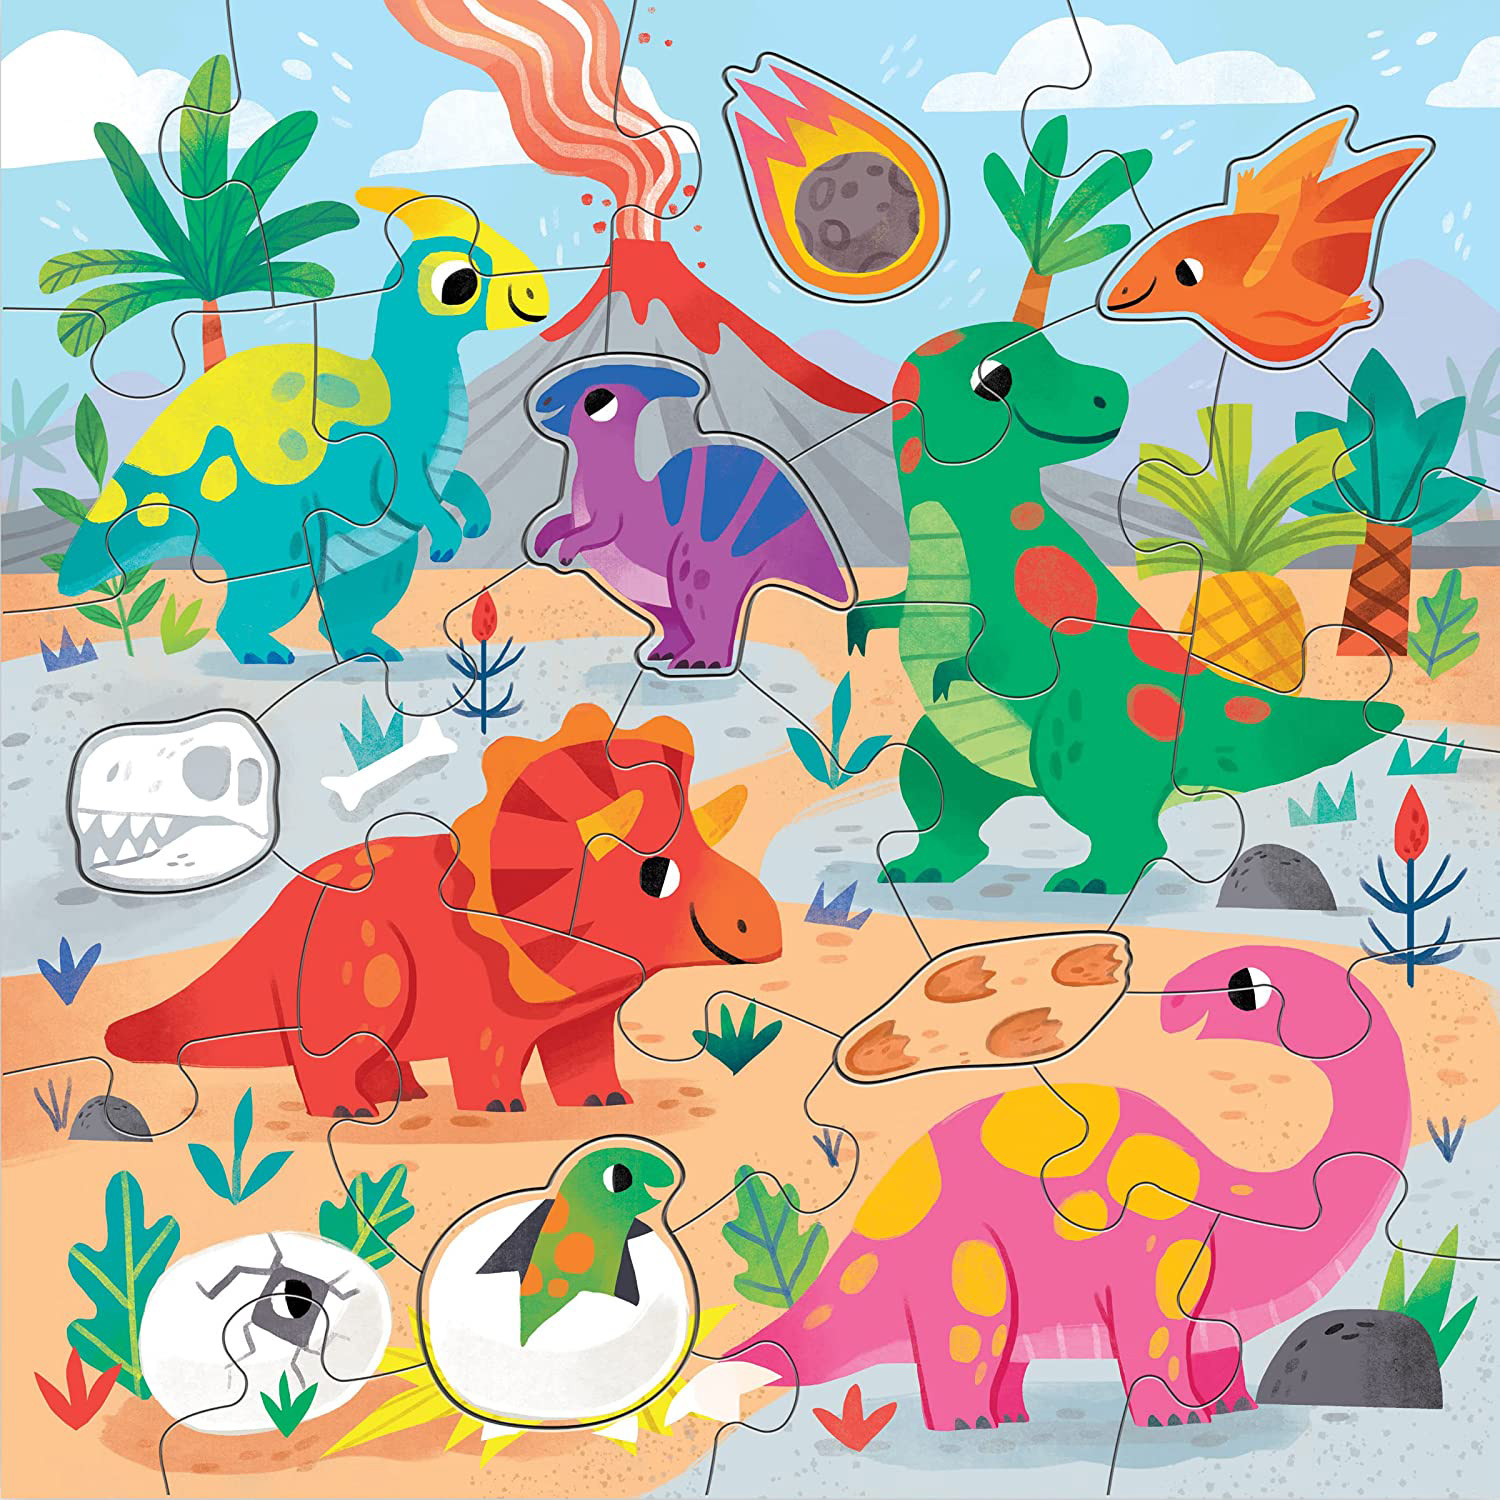 Dinosaur Park Floor Puzzle - Scratch and Dent Dinosaurs Jigsaw Puzzle